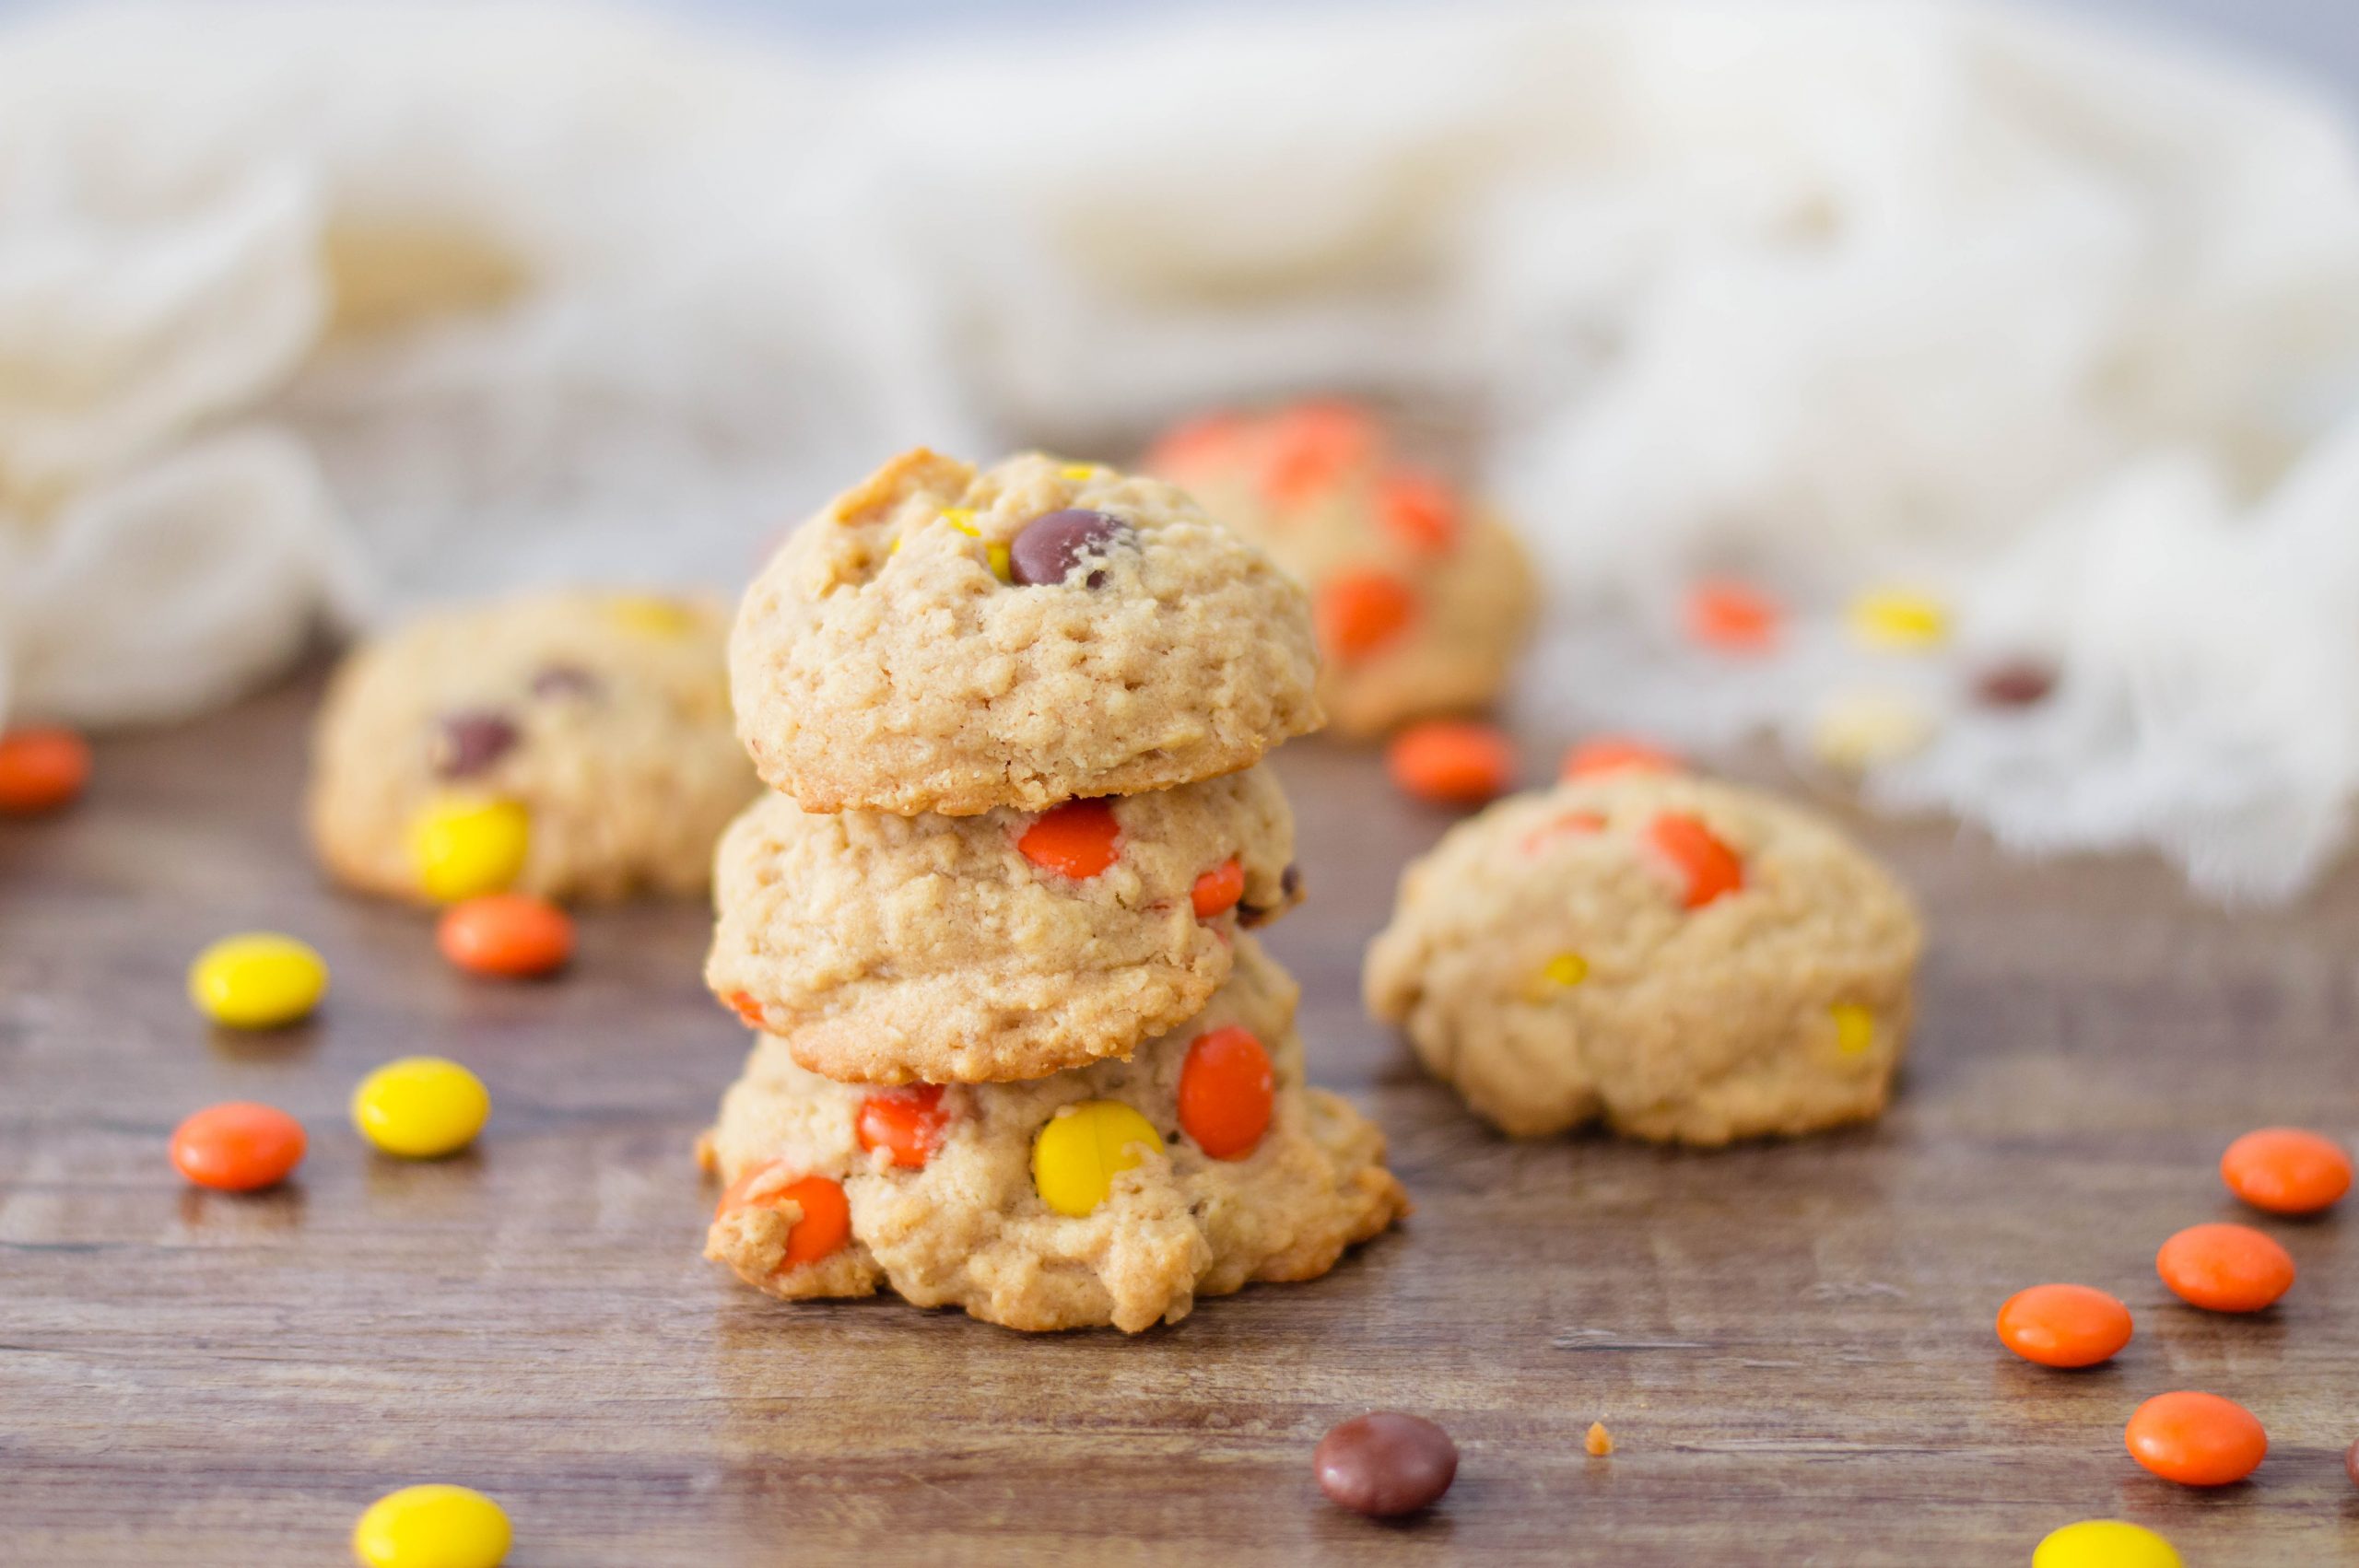 Oatmeal Reese's Pieces Cookies